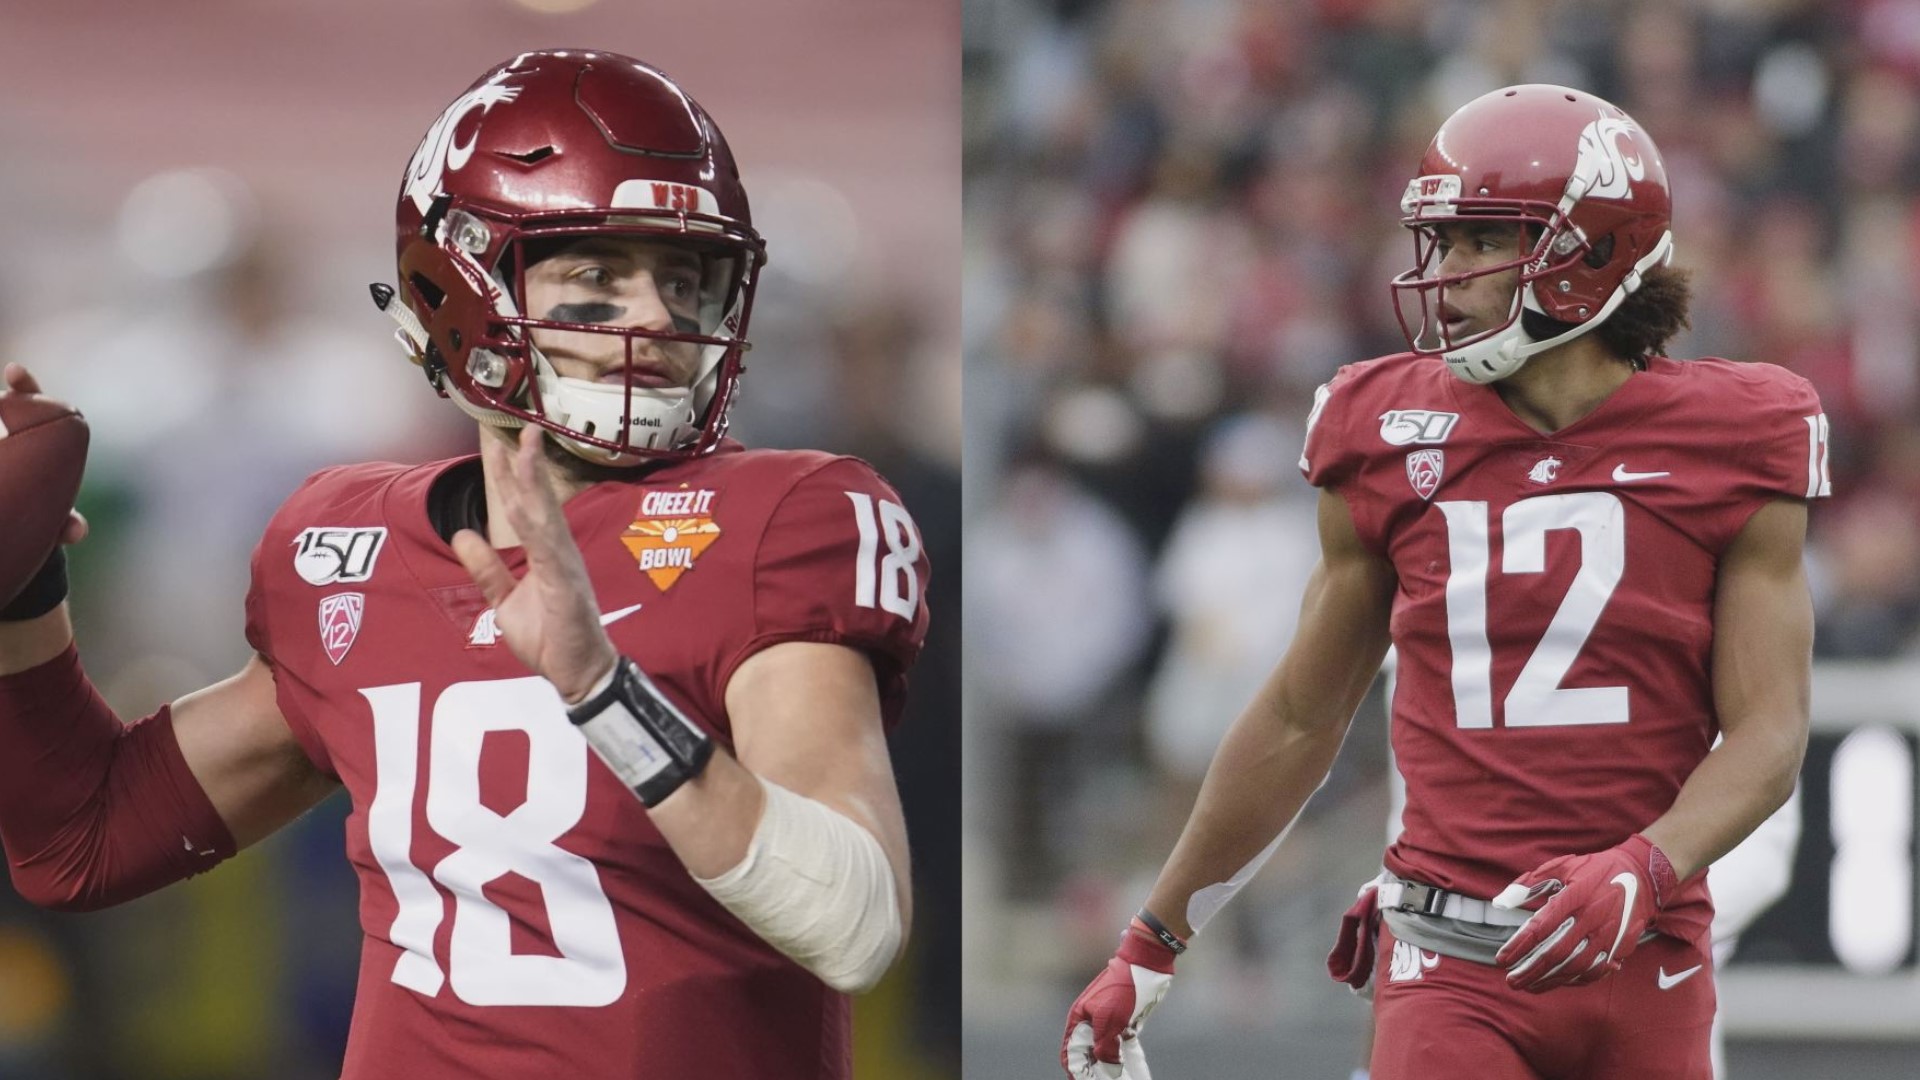 Gordon said in his media availability Tuesday that he appreciates Mike Leach for helping instill two character traits that will help him in the NFL Draft process.